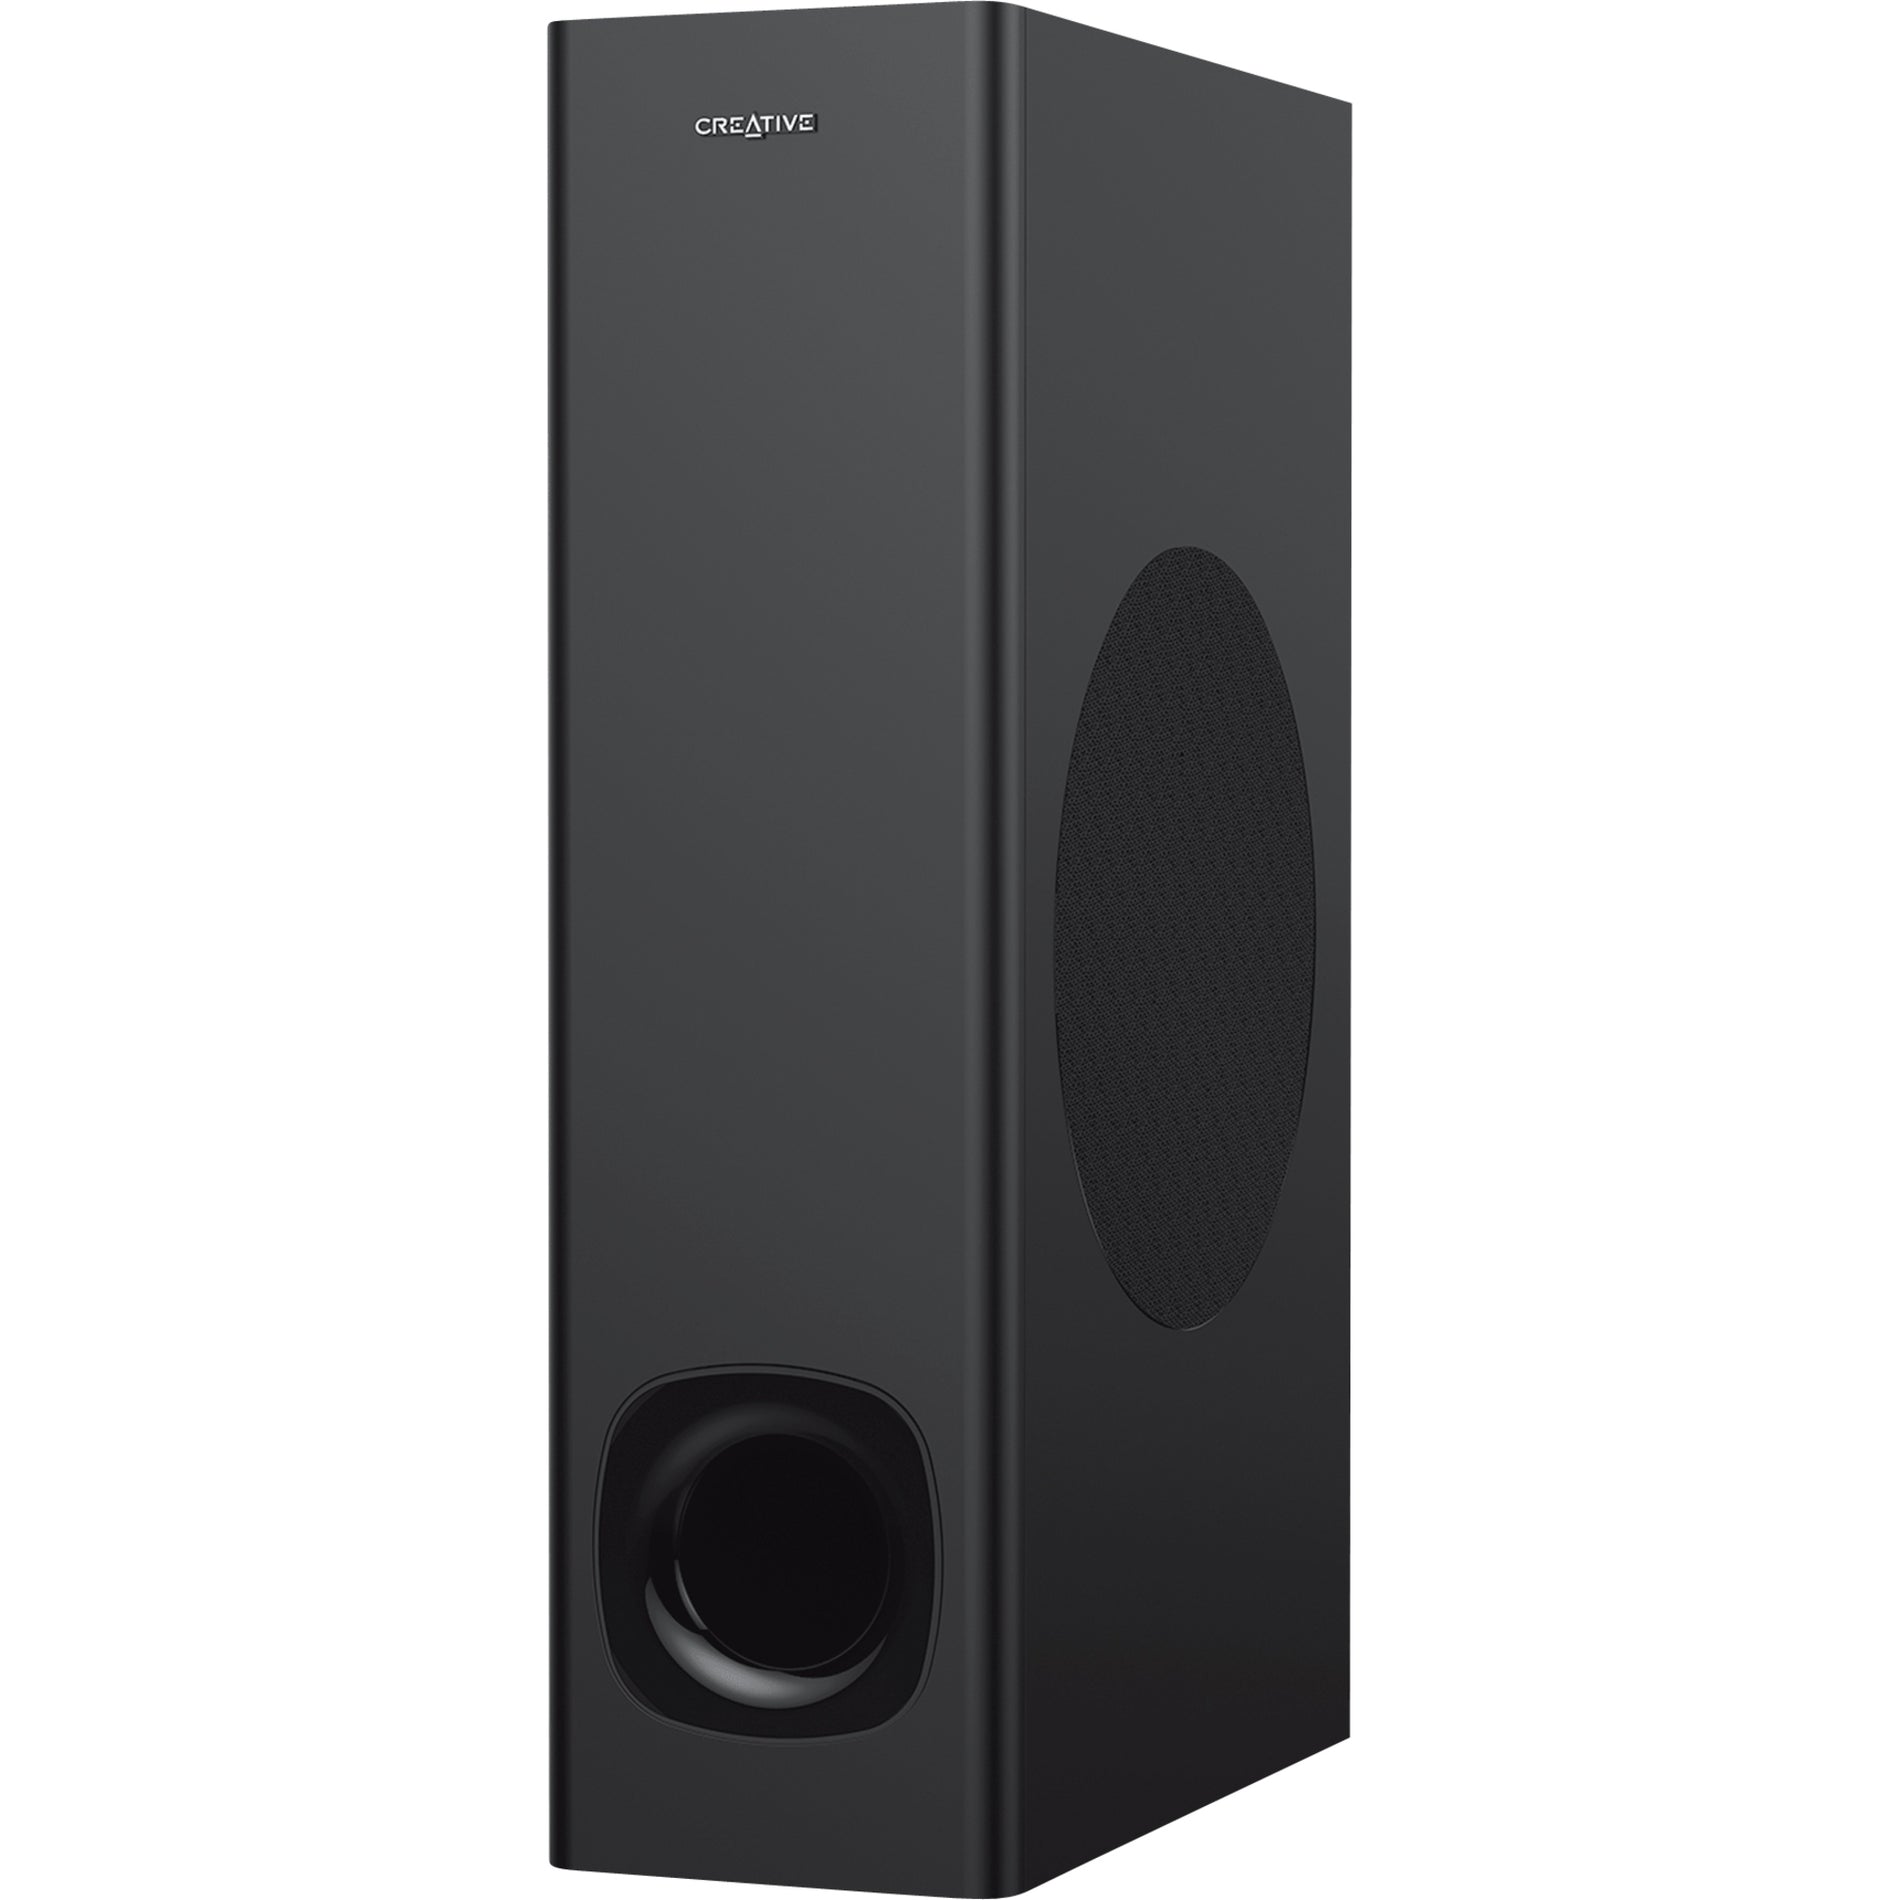 Creative 51MF8360AA002 Stage Speaker System, Bluetooth, Deep Bass, Remote Control